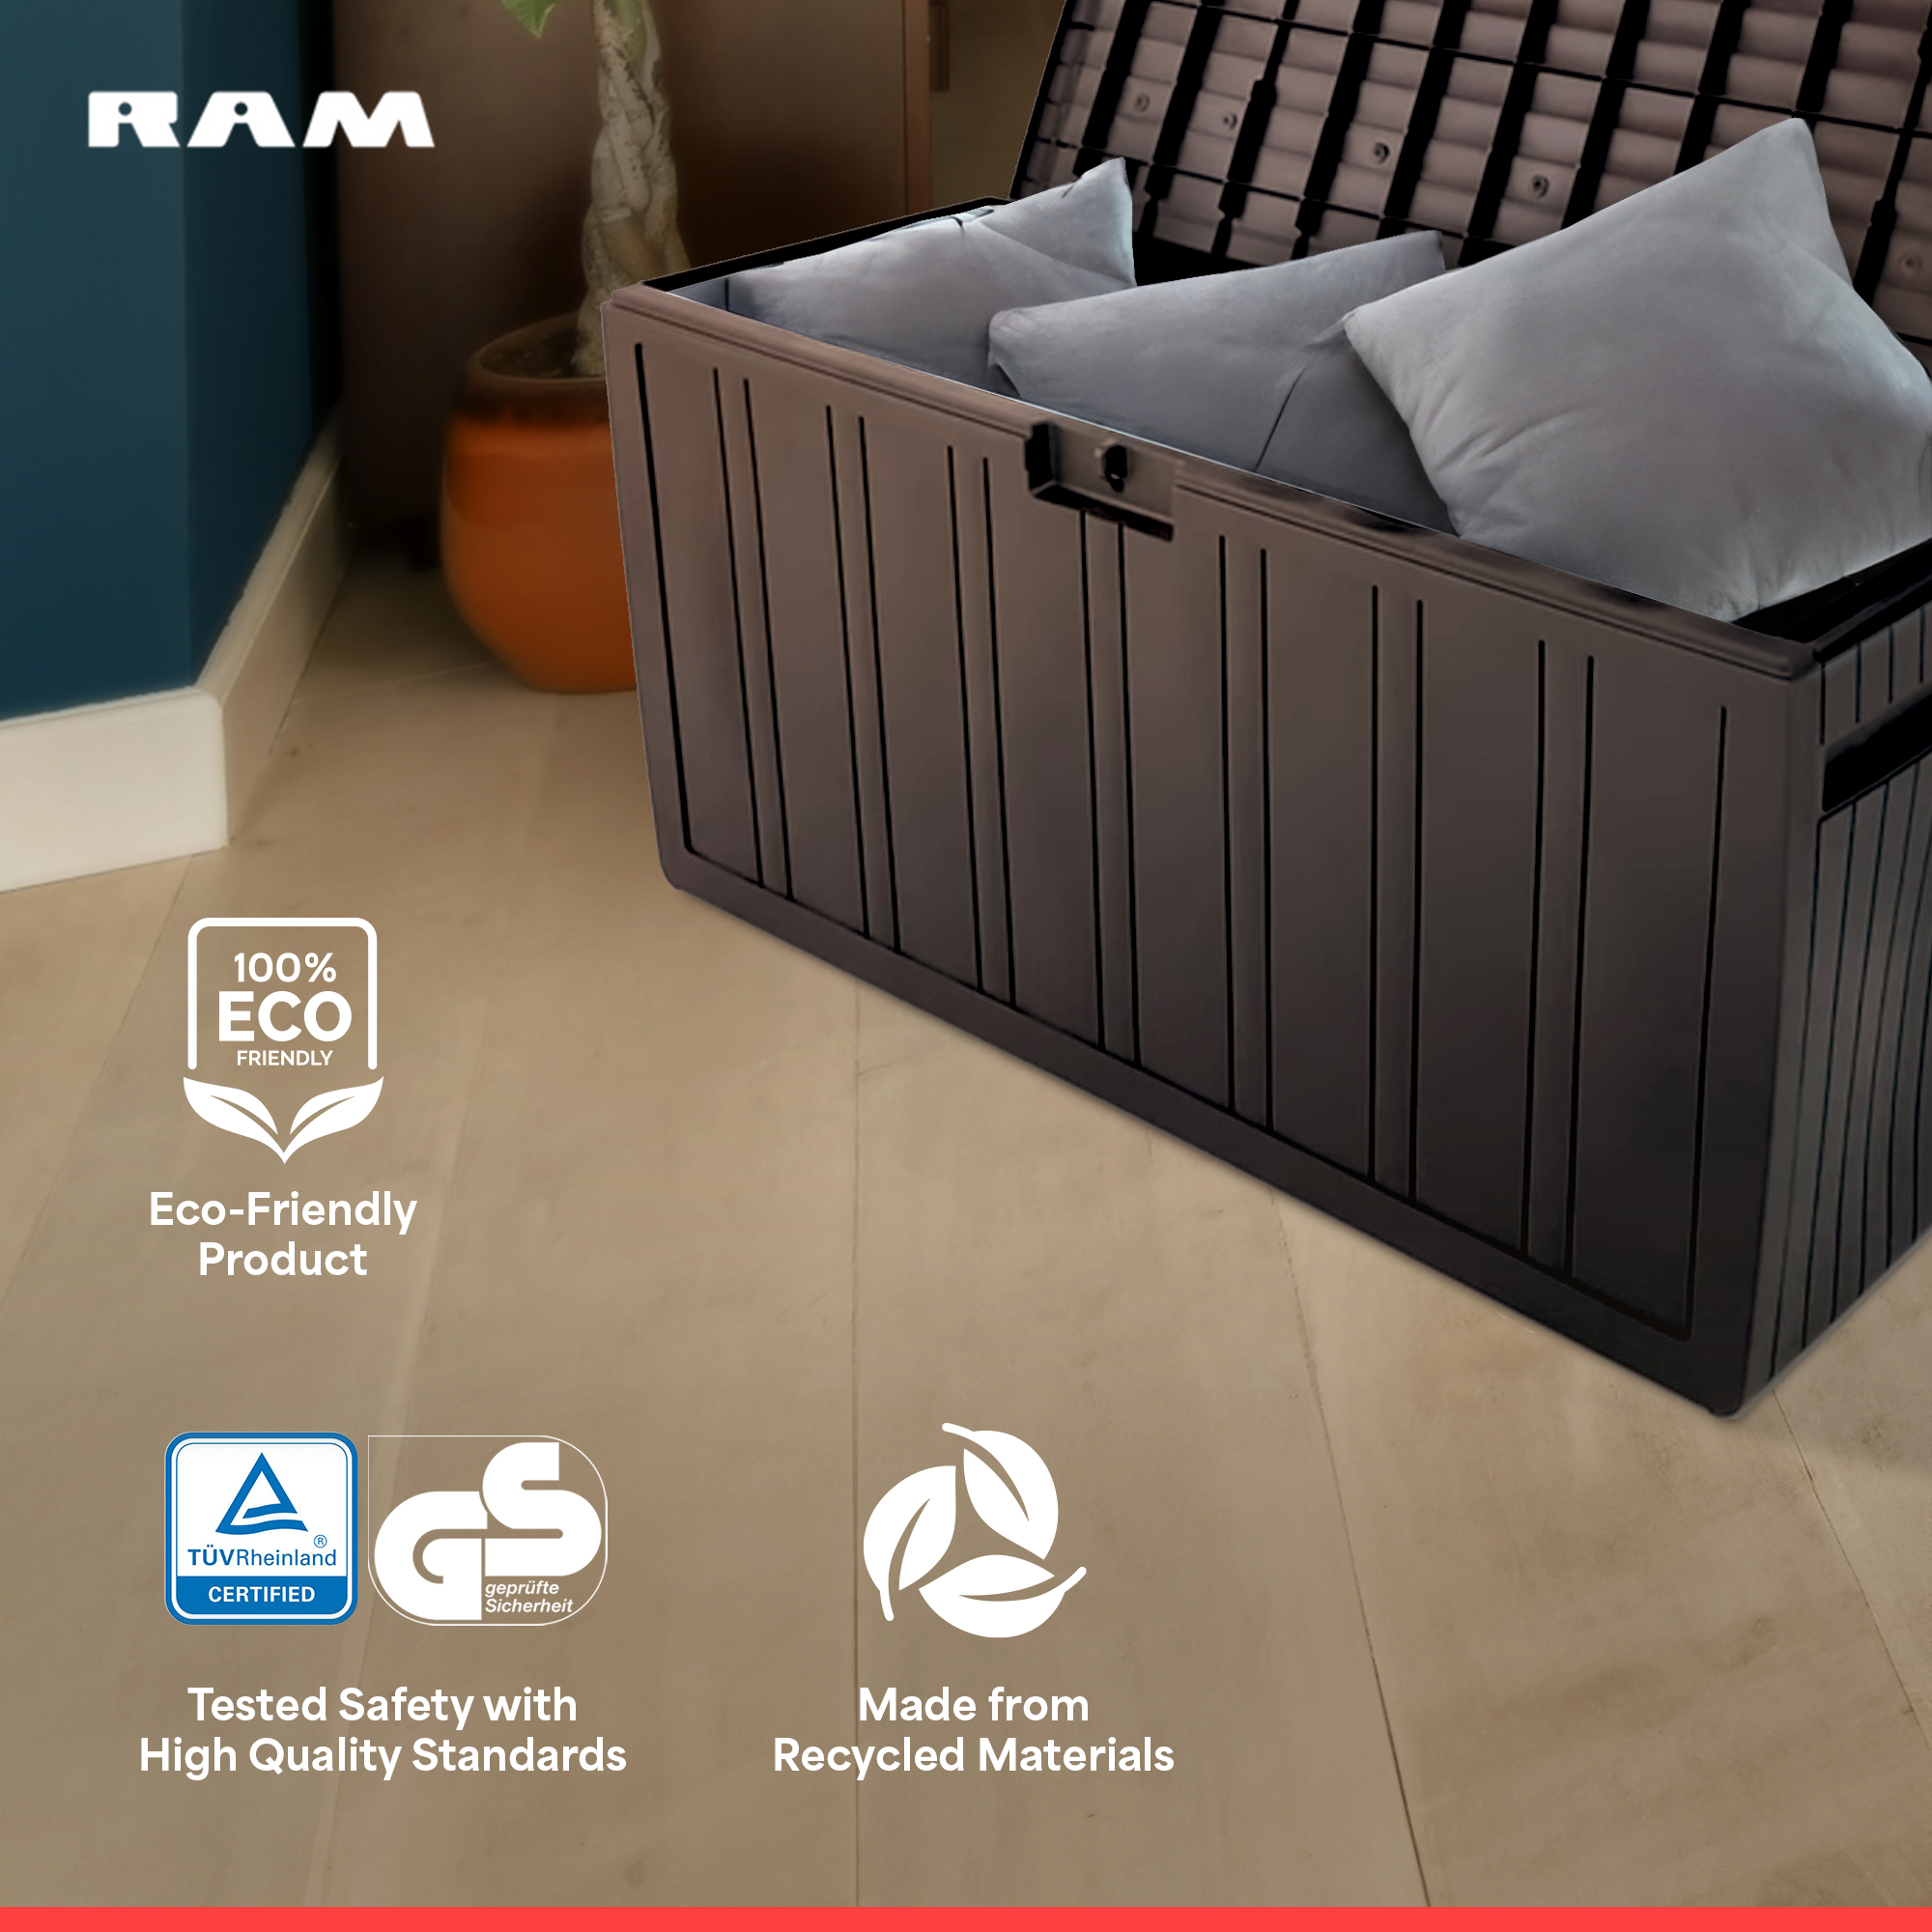 Ram Quality Products 71 Gallon Outdoor Backyard Patio Storage Deck Box - image 5 of 11